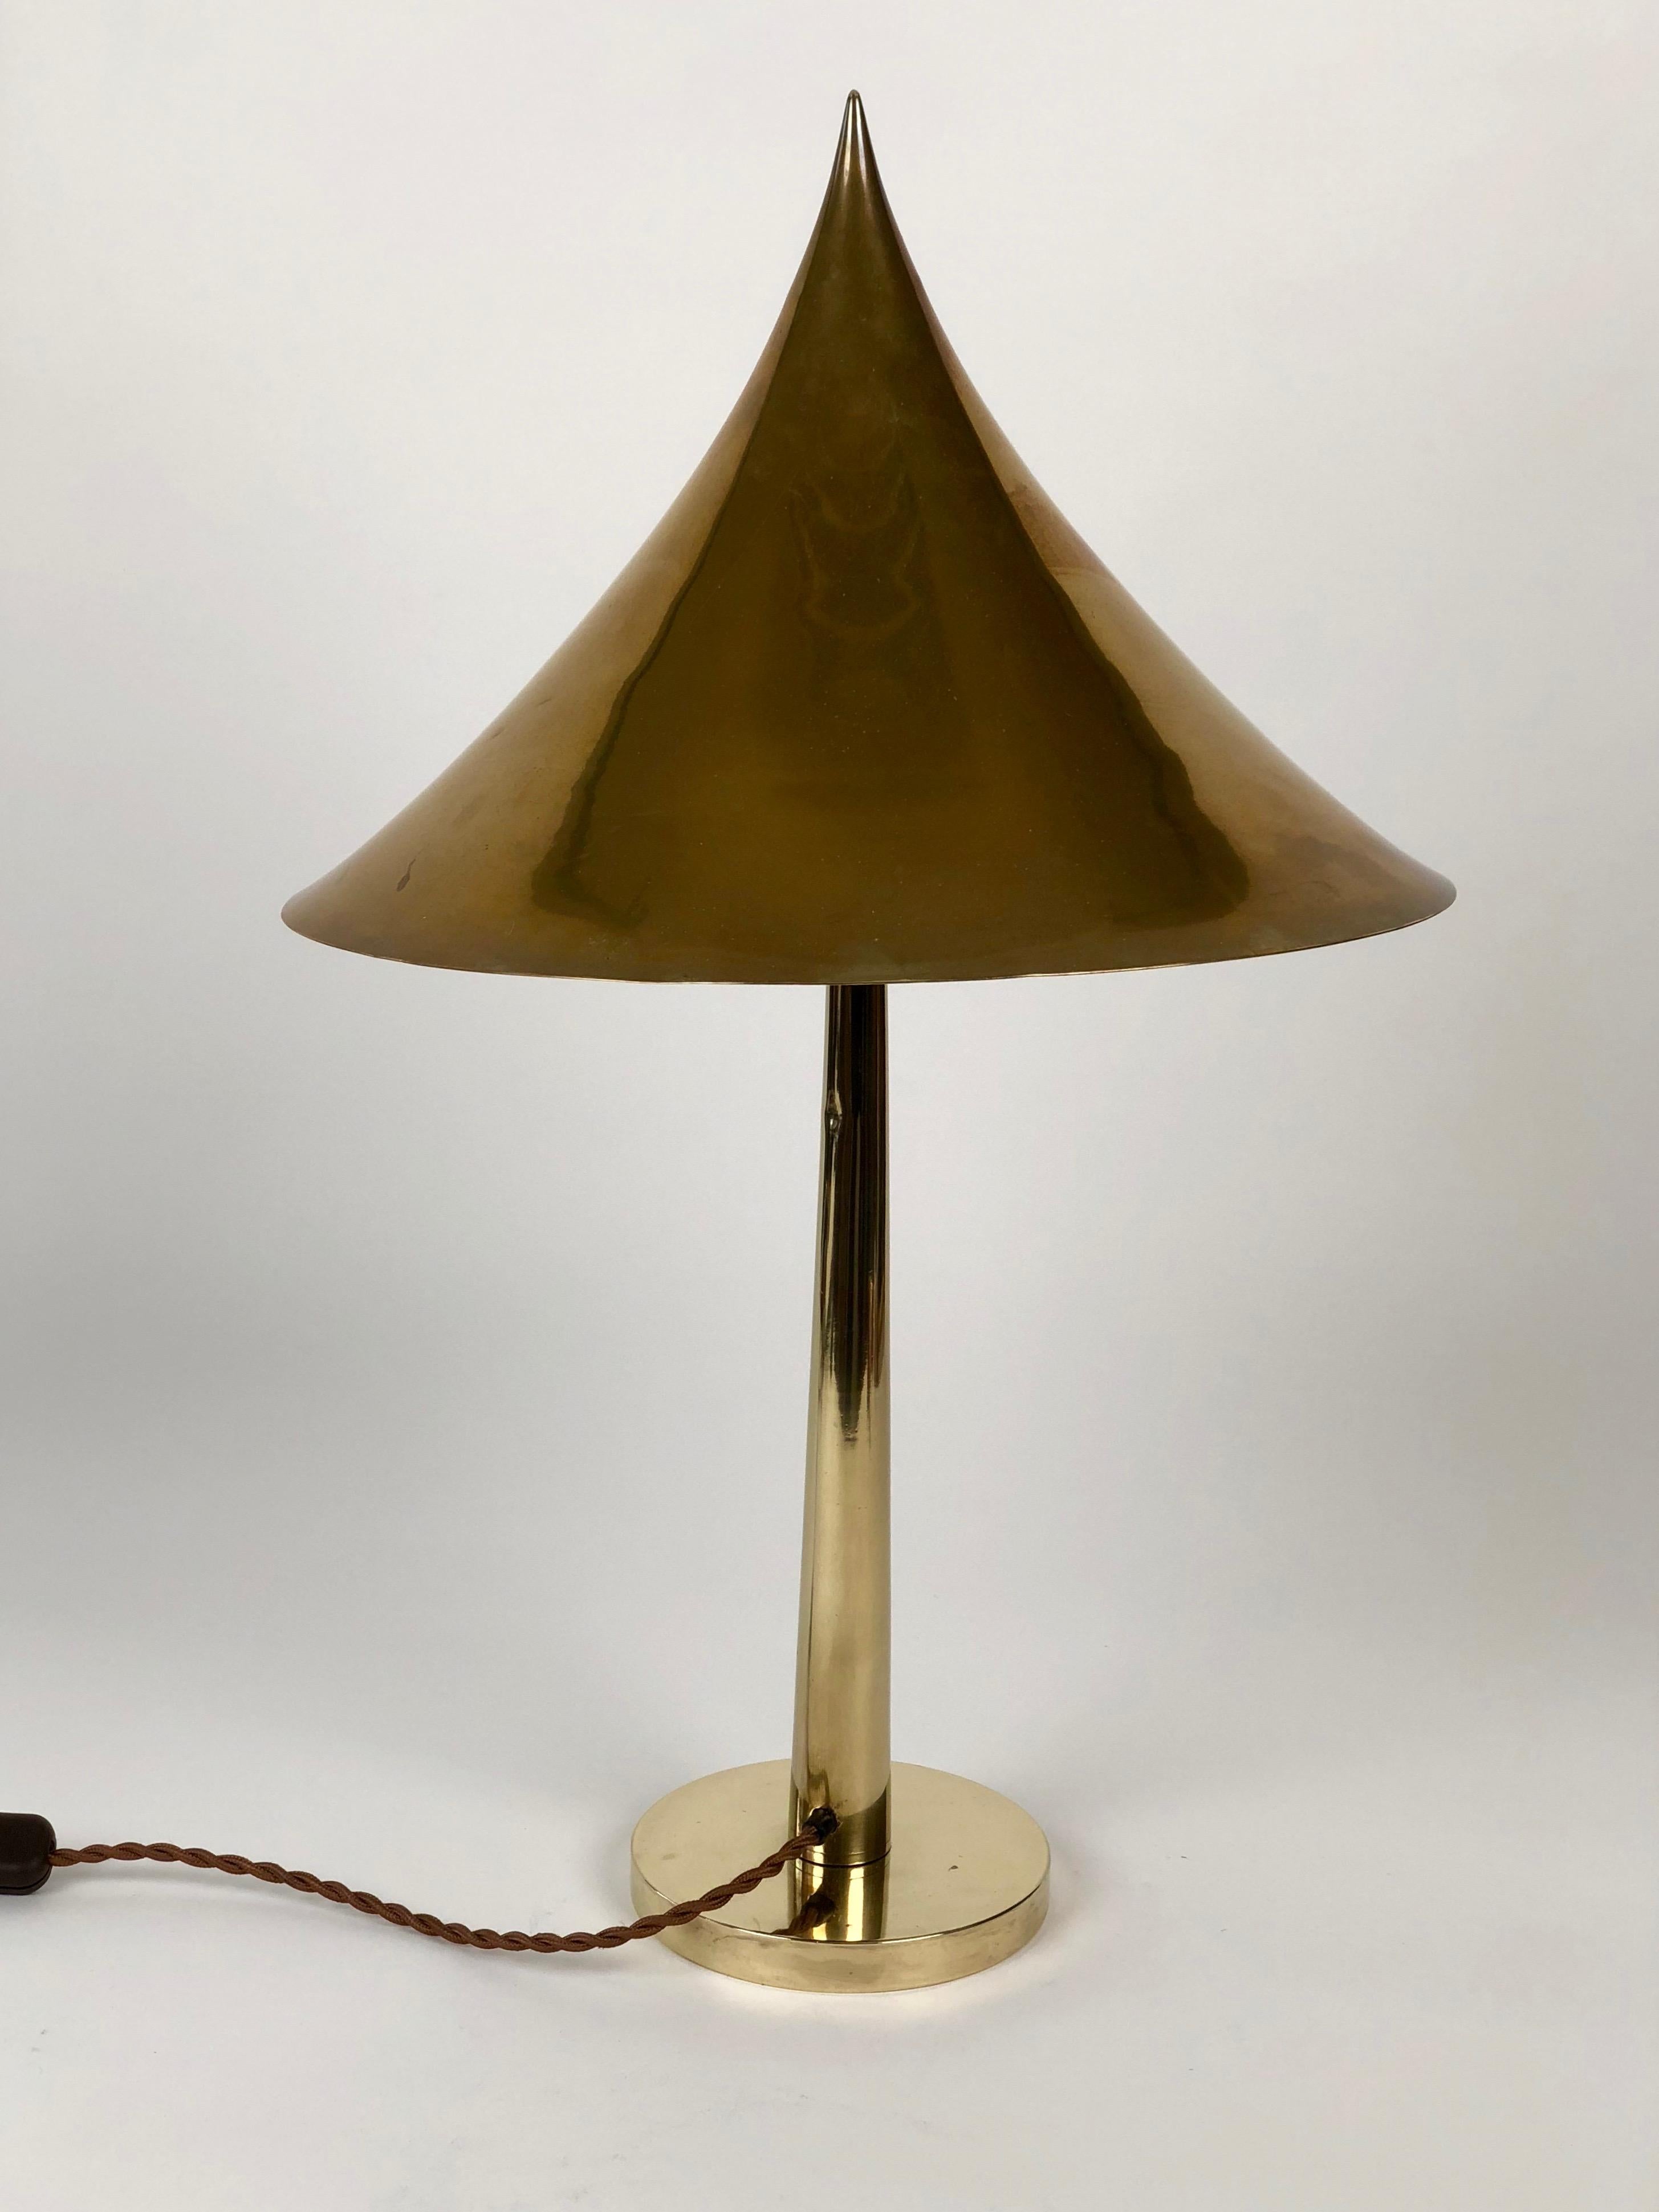 Table lamp from company August Melzer, Vienna Austria, ca 1910/1915. 
The shade is a pointed cone that is made out of brass, it is supported on a tapper
shaft which is attached to a cylindrical base. These three elements are perfectly proportioned